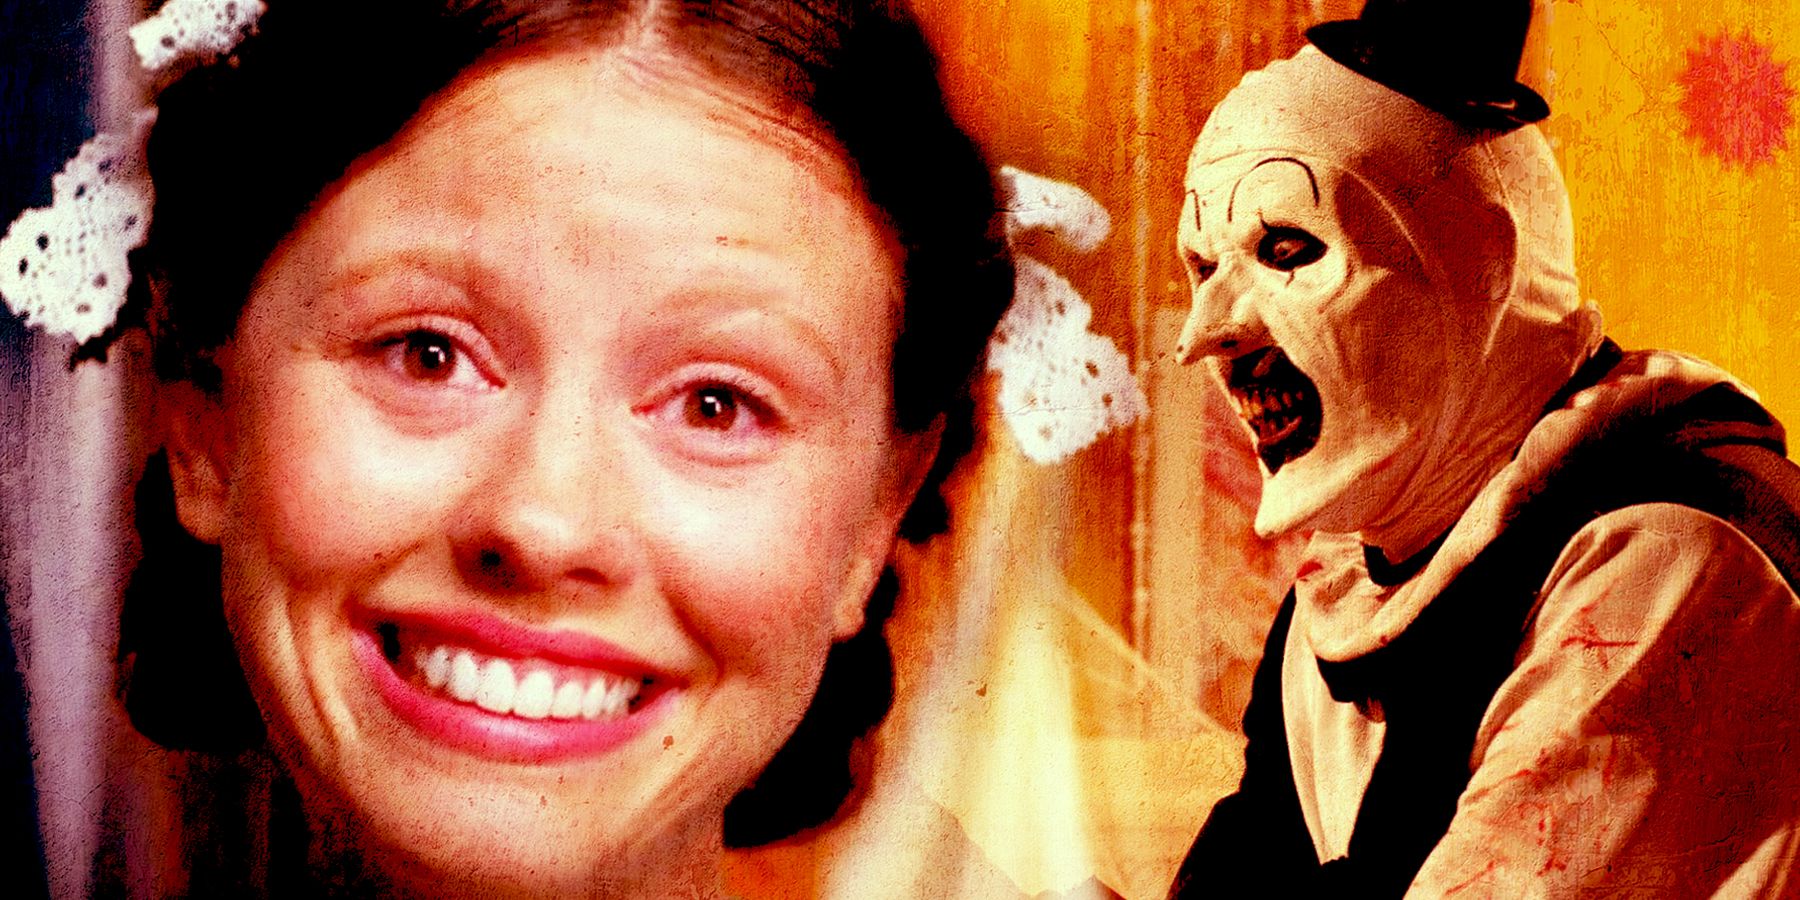 Terrifier 2 & Ti West's X Trilogy Prove Moviegoers Are Desperate for New Franchises